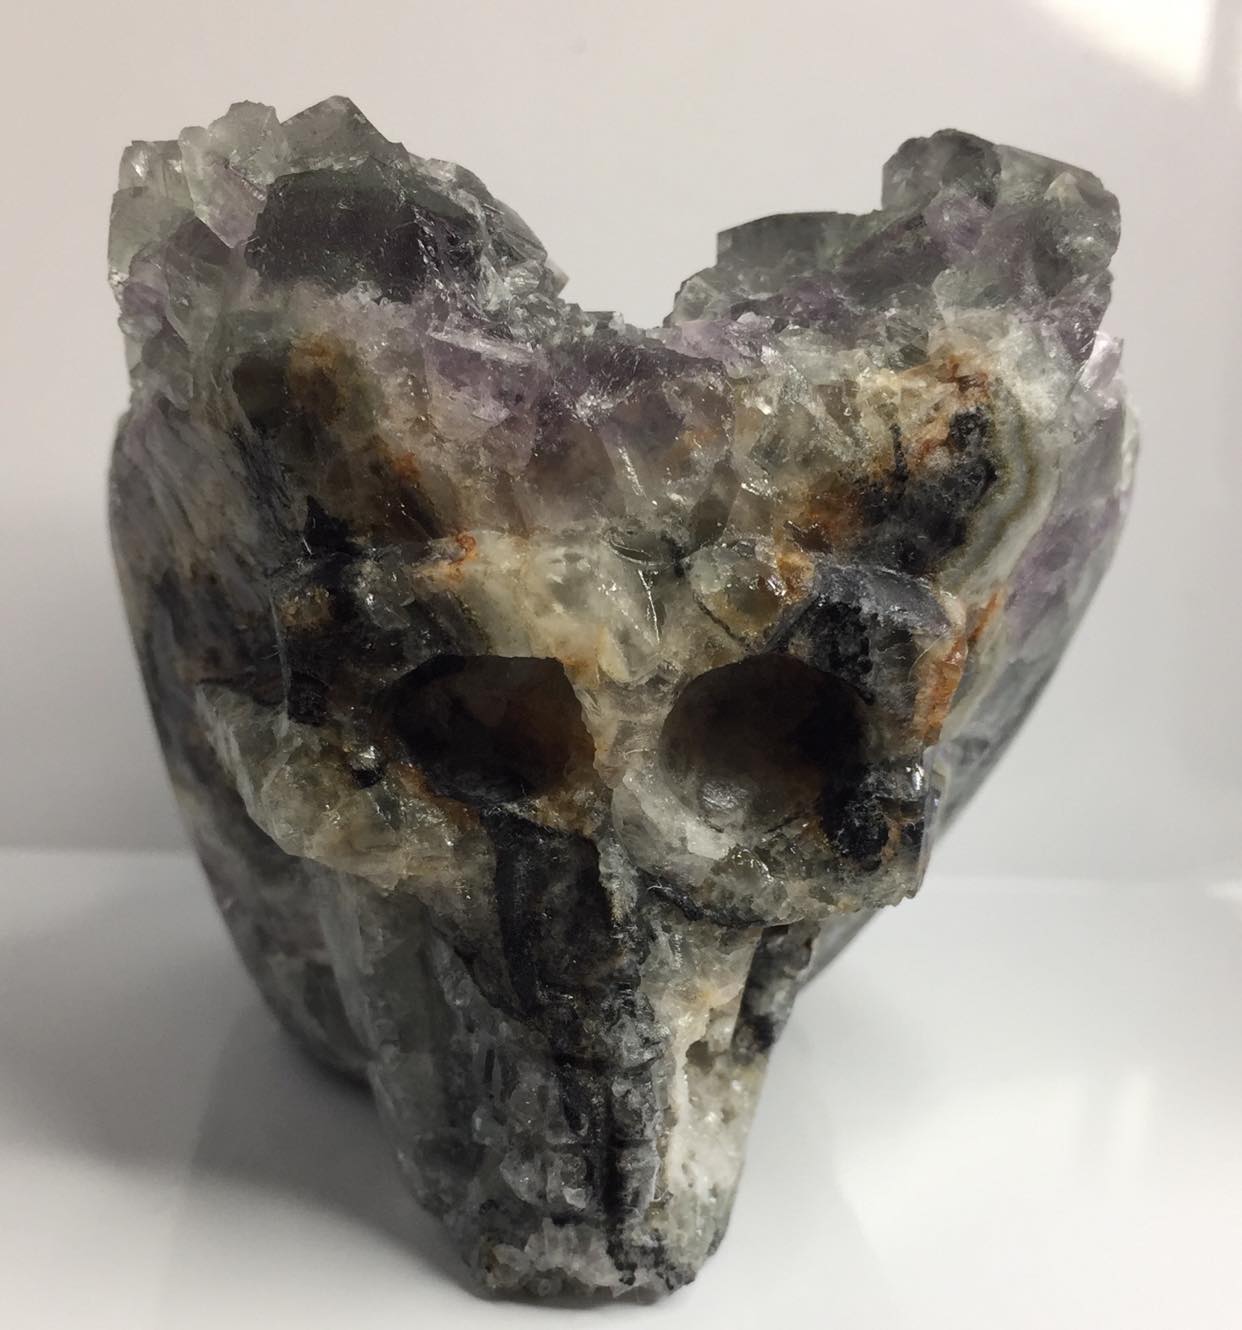 Fluorite skull with natural cube formations